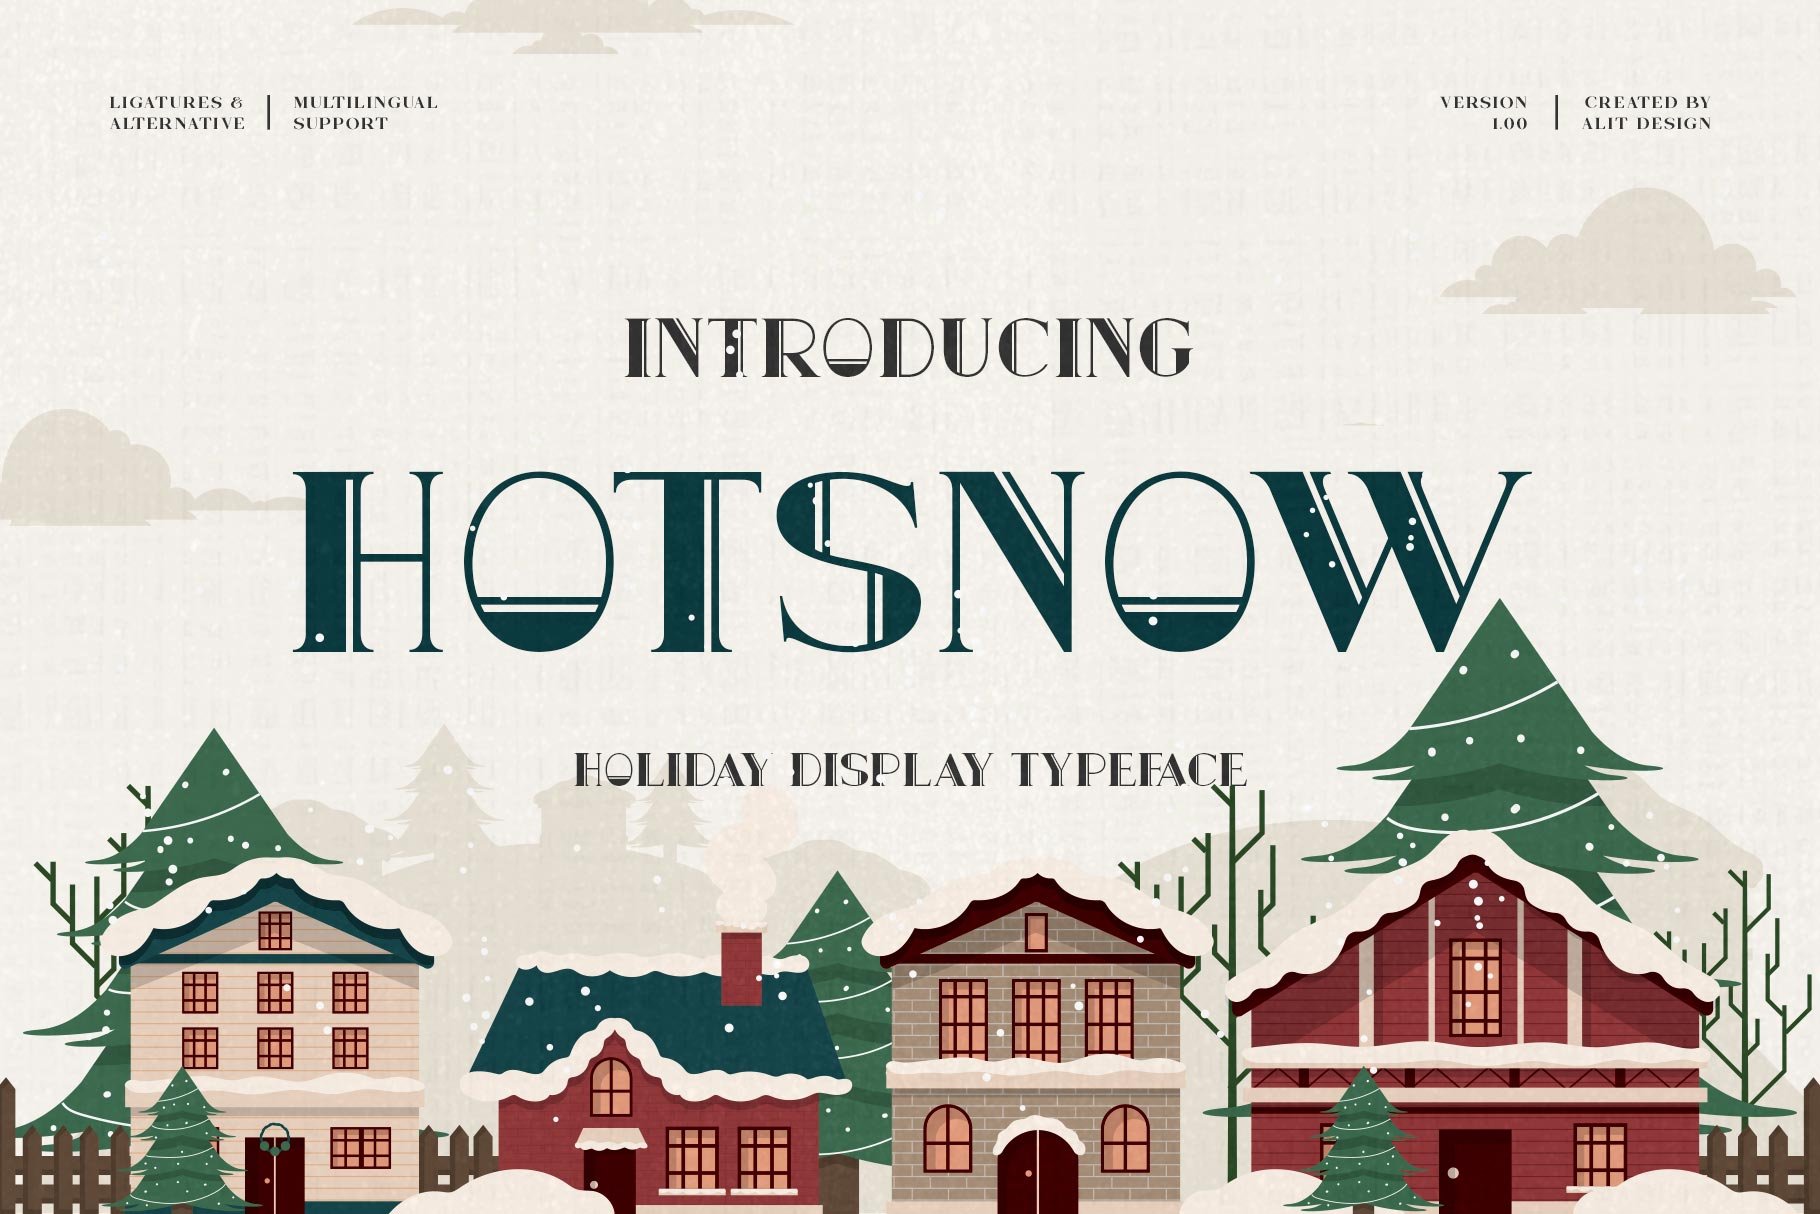 Hot Snow Typeface cover image.